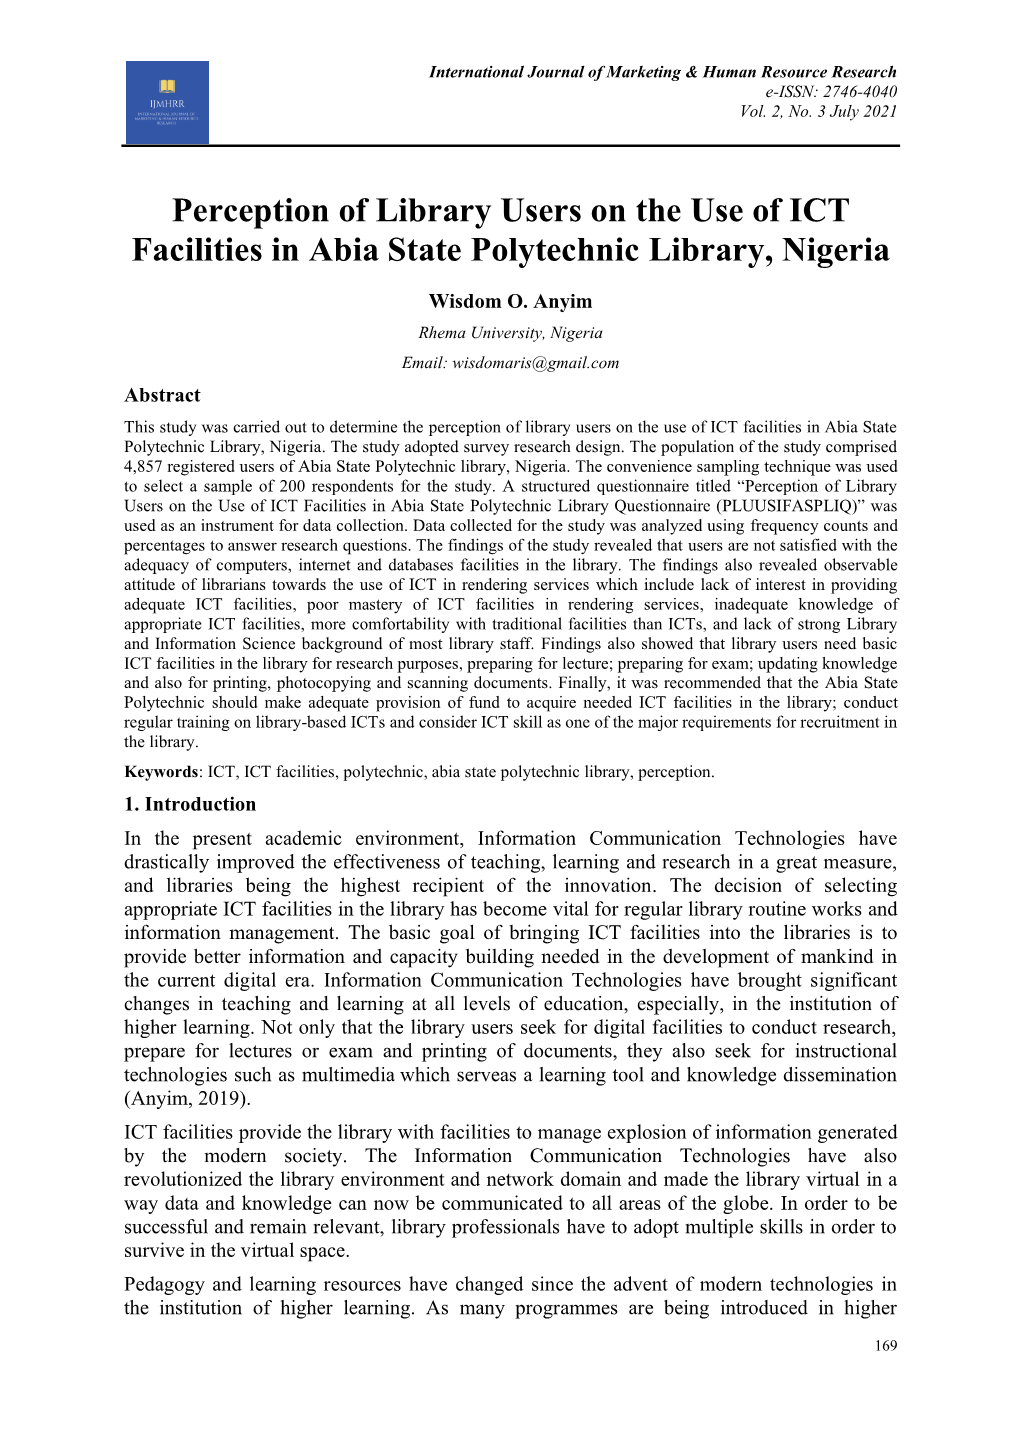 Perception of Library Users on the Use of ICT Facilities in Abia State Polytechnic Library, Nigeria